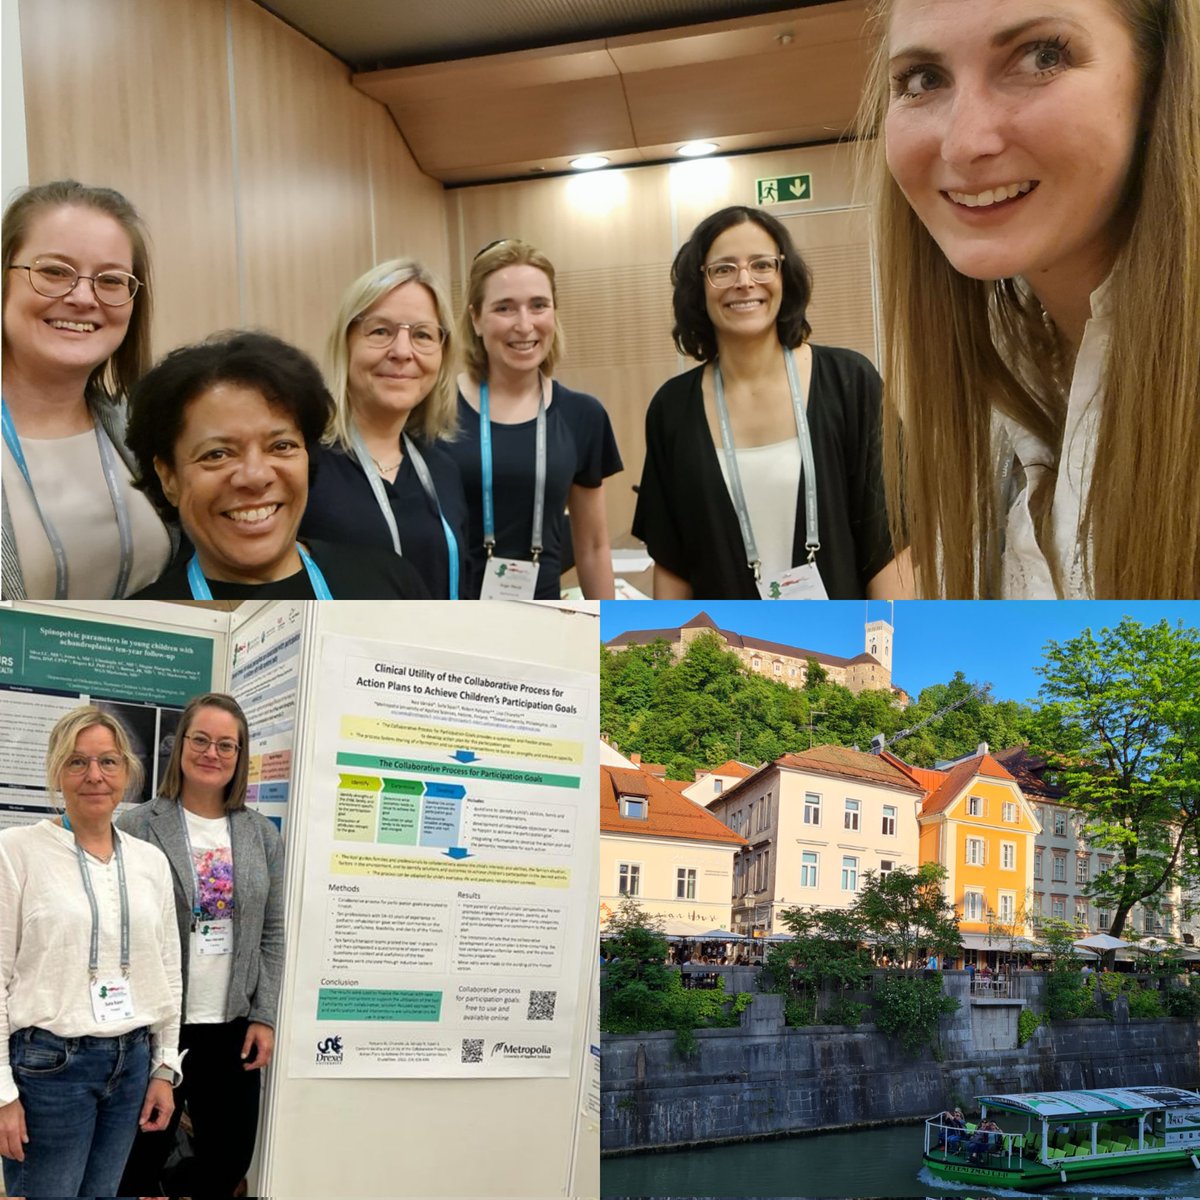 Had an amazing time at the #EACD2023! Inspiring presentations, learning & connecting with friends passionate about participation-focused rehab, and promoting the well-being of children and families. Truly uplifting! @dana_anaby @MeuserSarah @SipariSalla @IJeglinsky Inge Heus